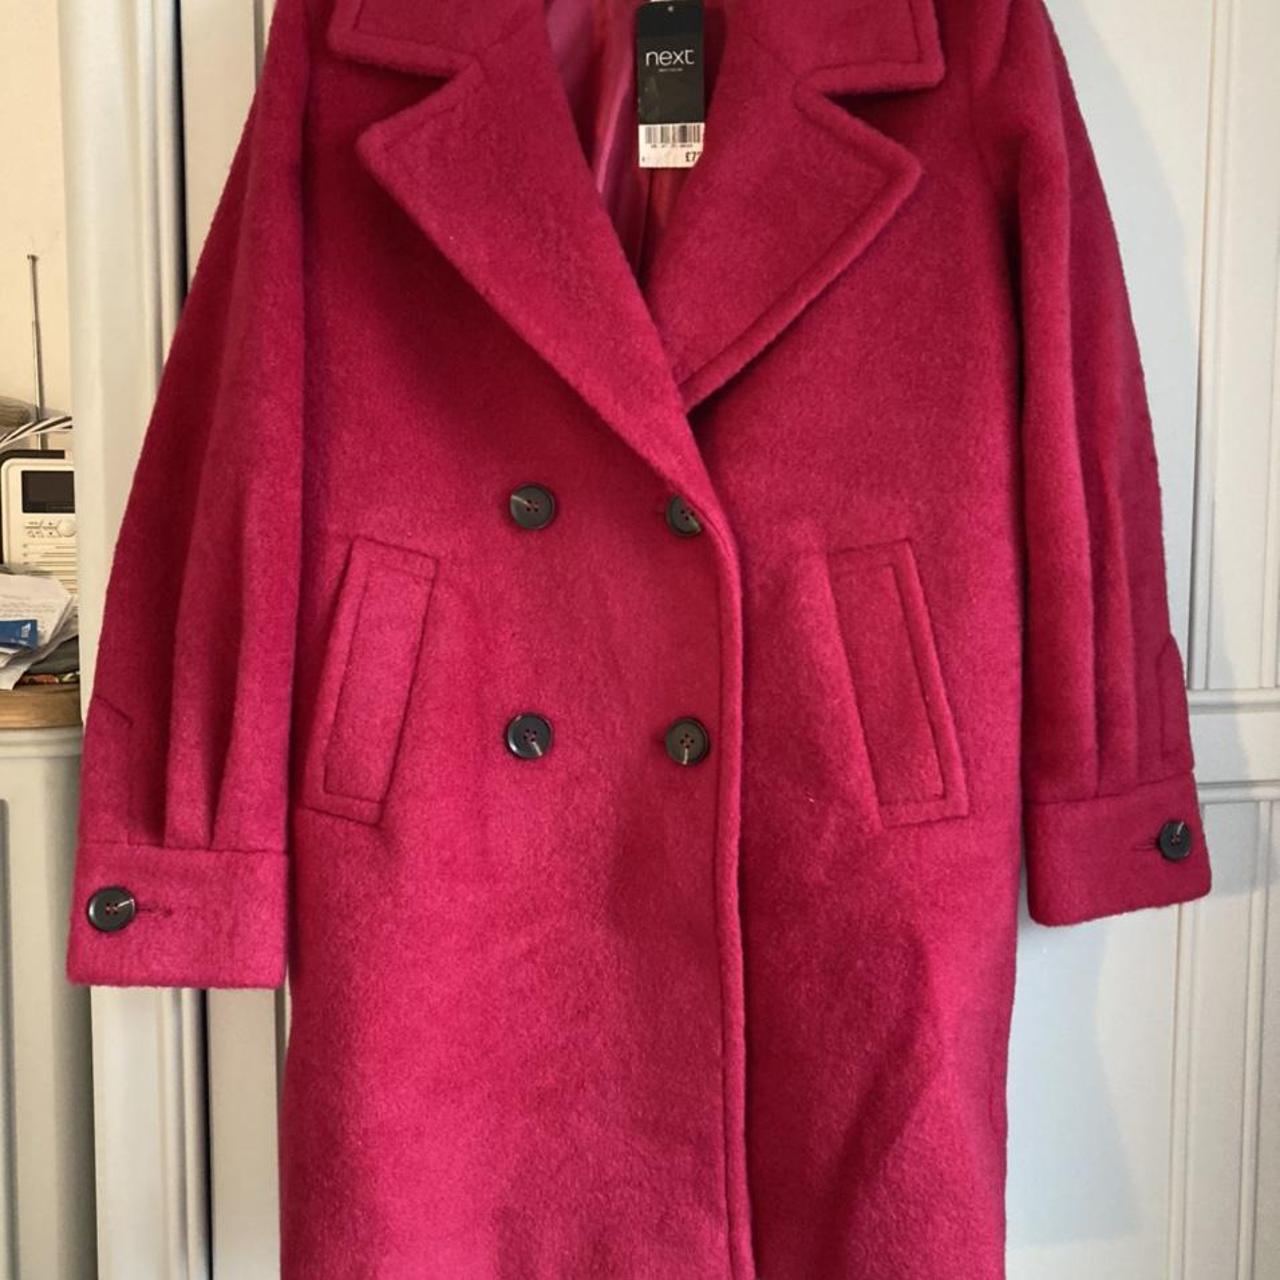 Next Pink coat. Would fit up to a size 10 easily! ... - Depop